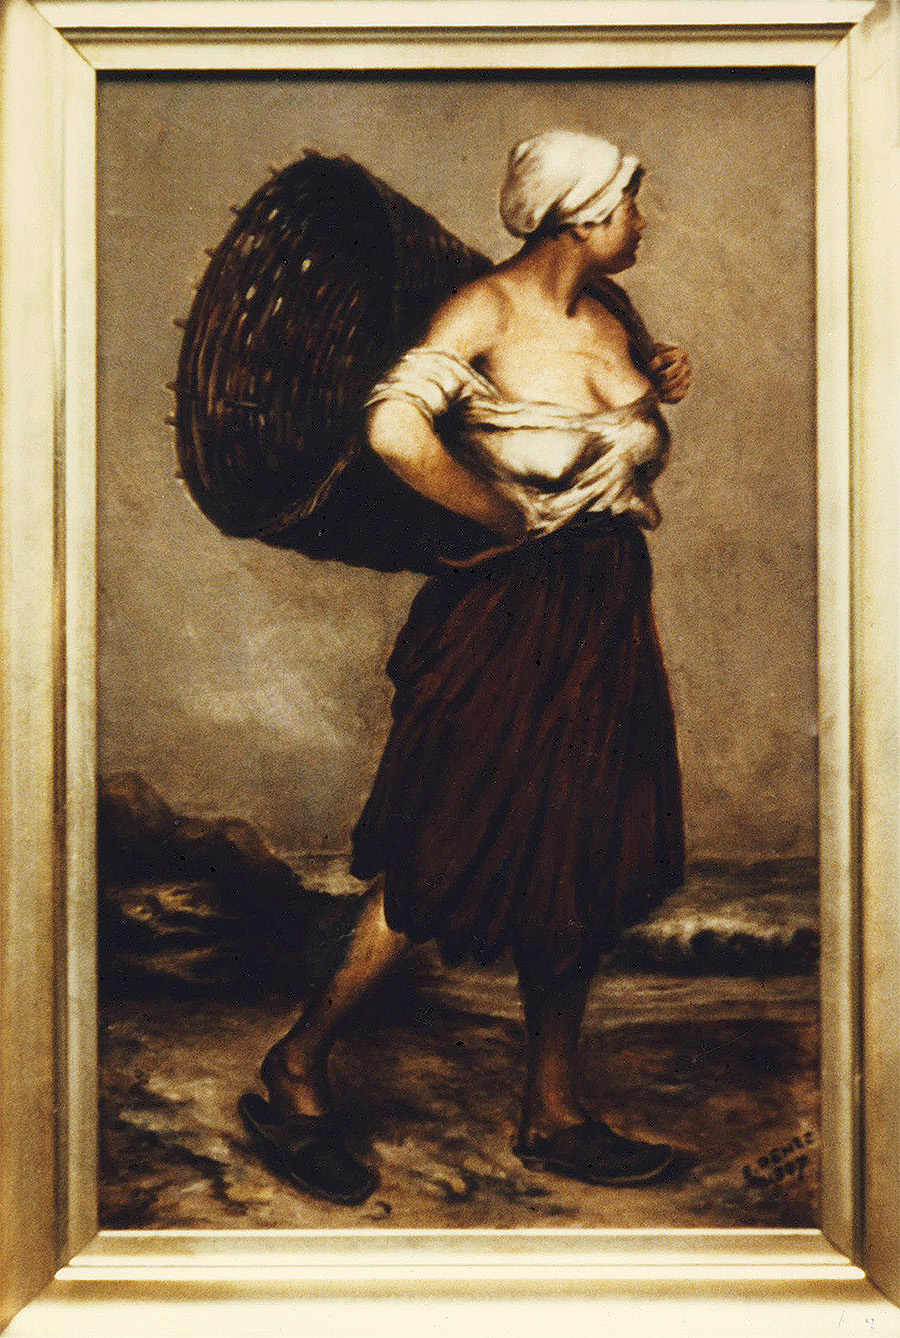 Fisher Woman